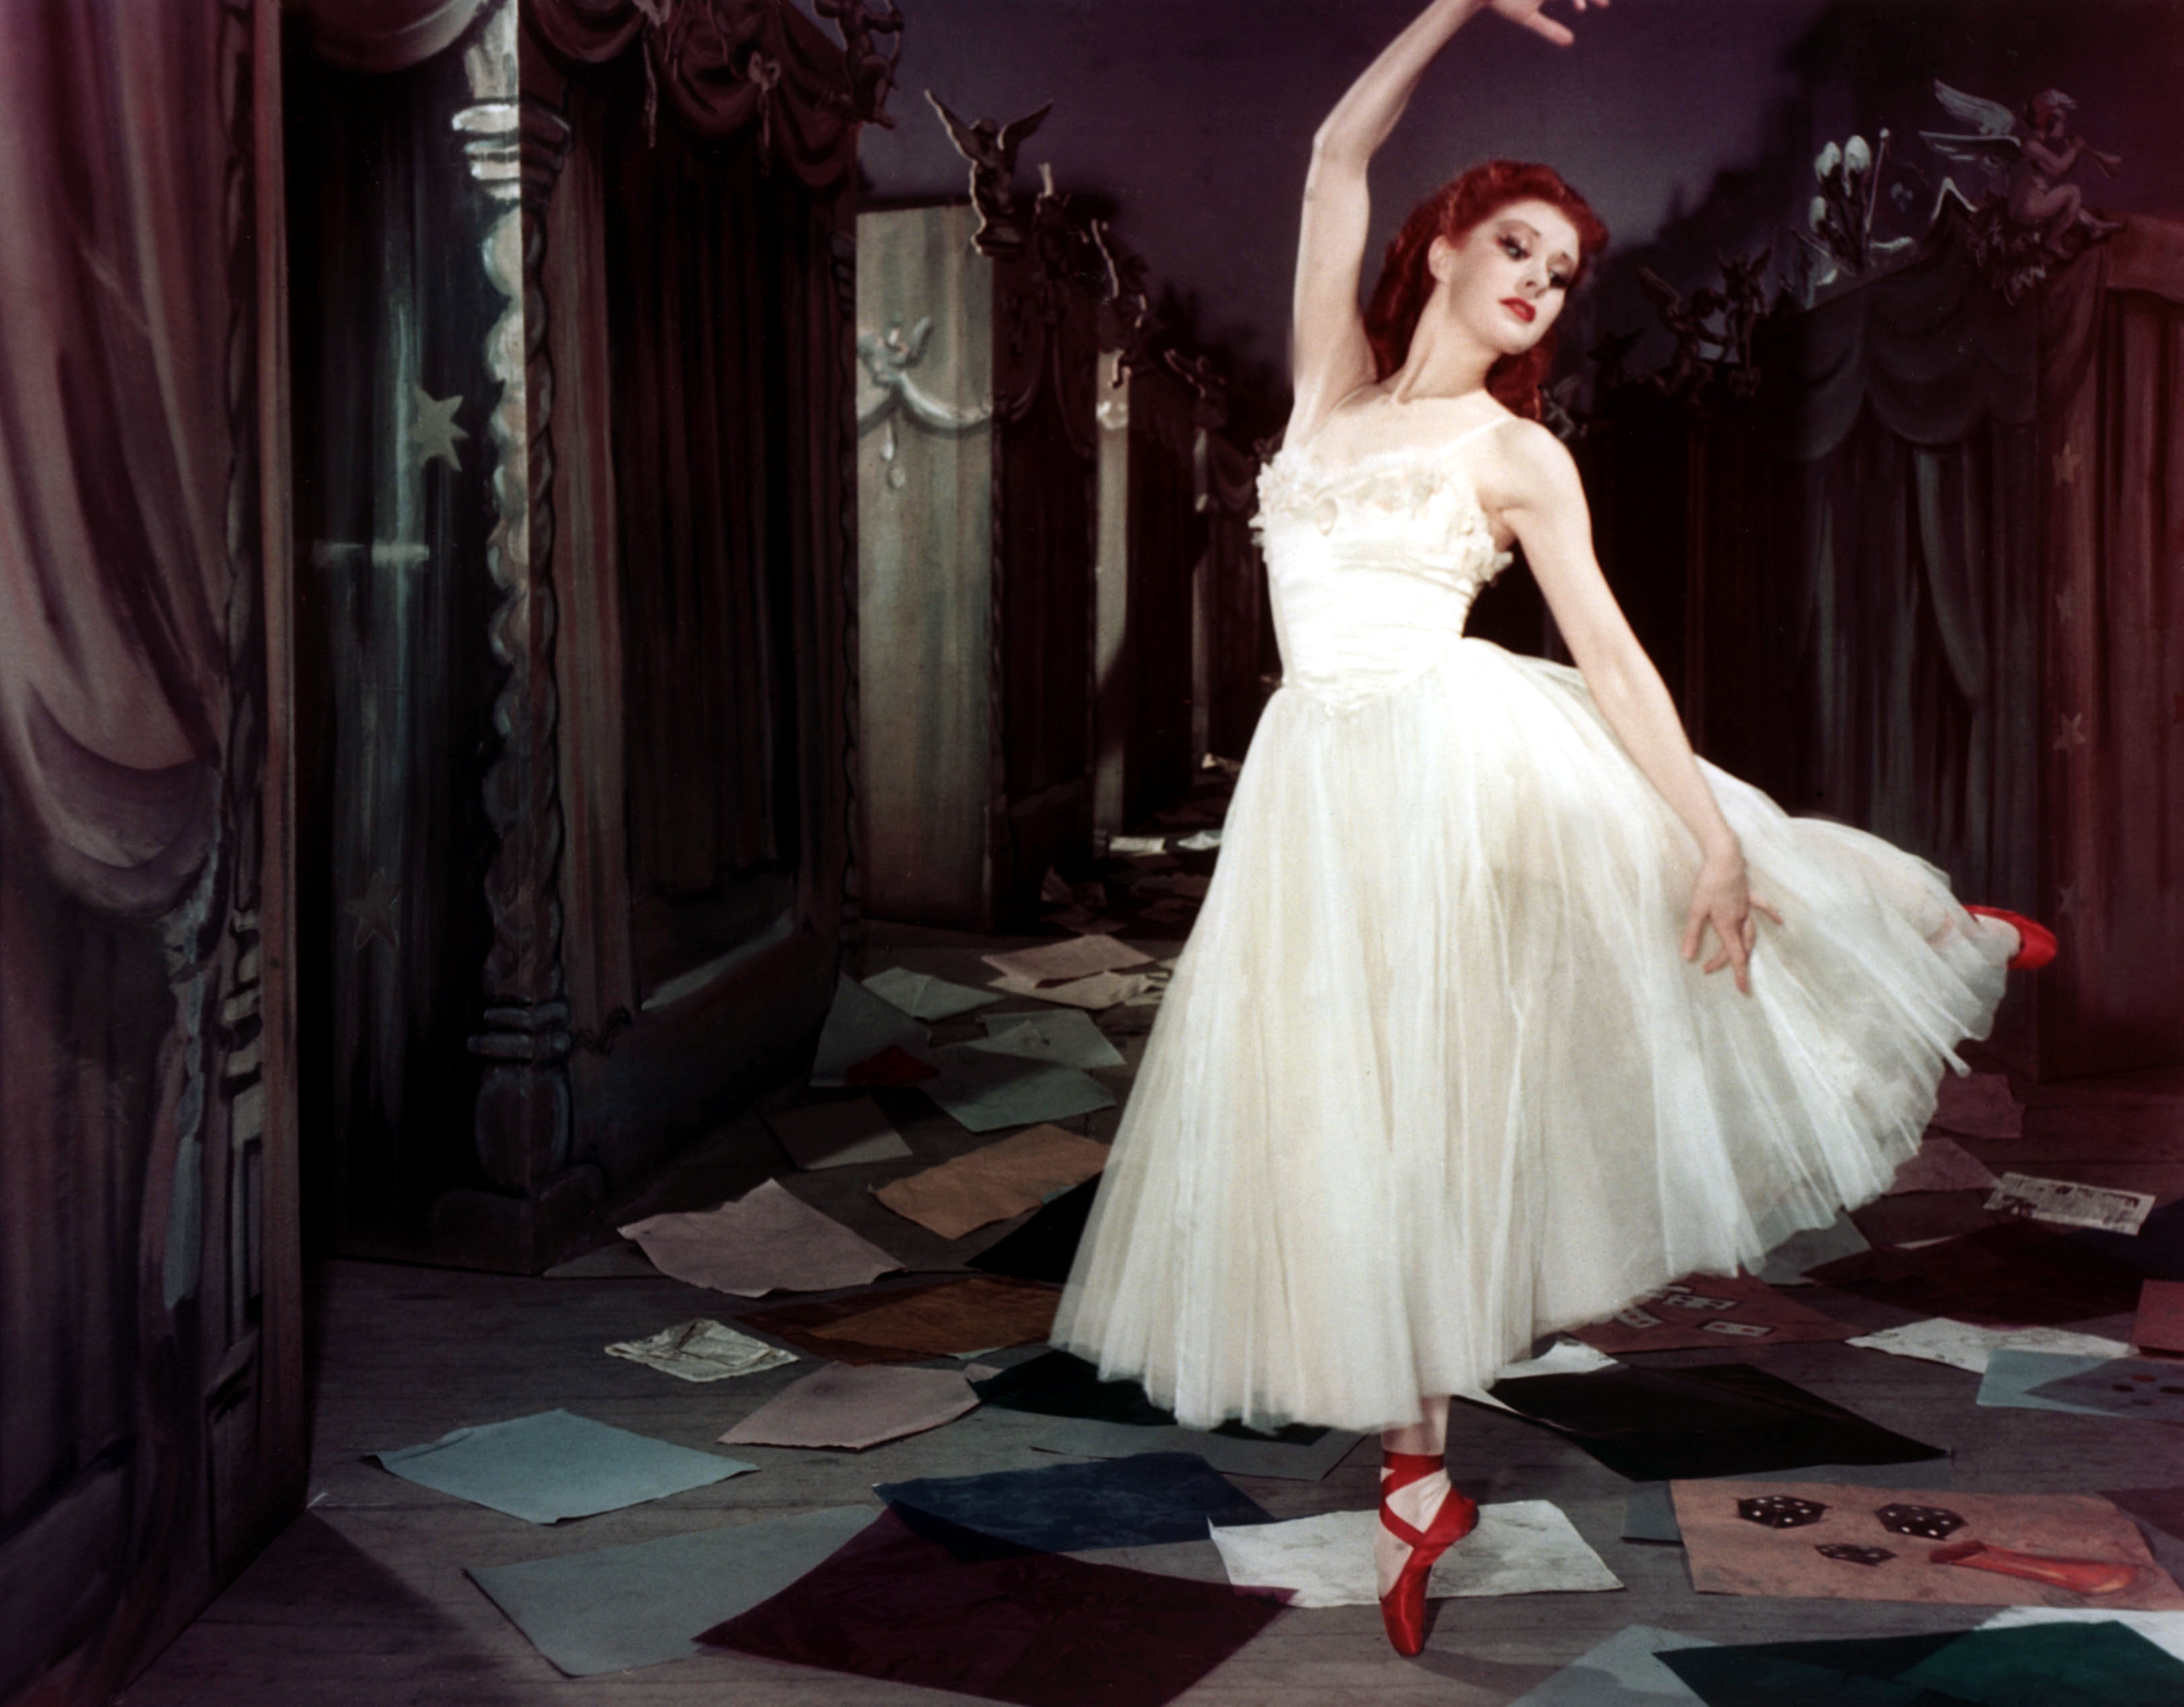 Moira Shearer in ‘The Red Shoes’ (1948) – a film about a ballerina driven to suicide